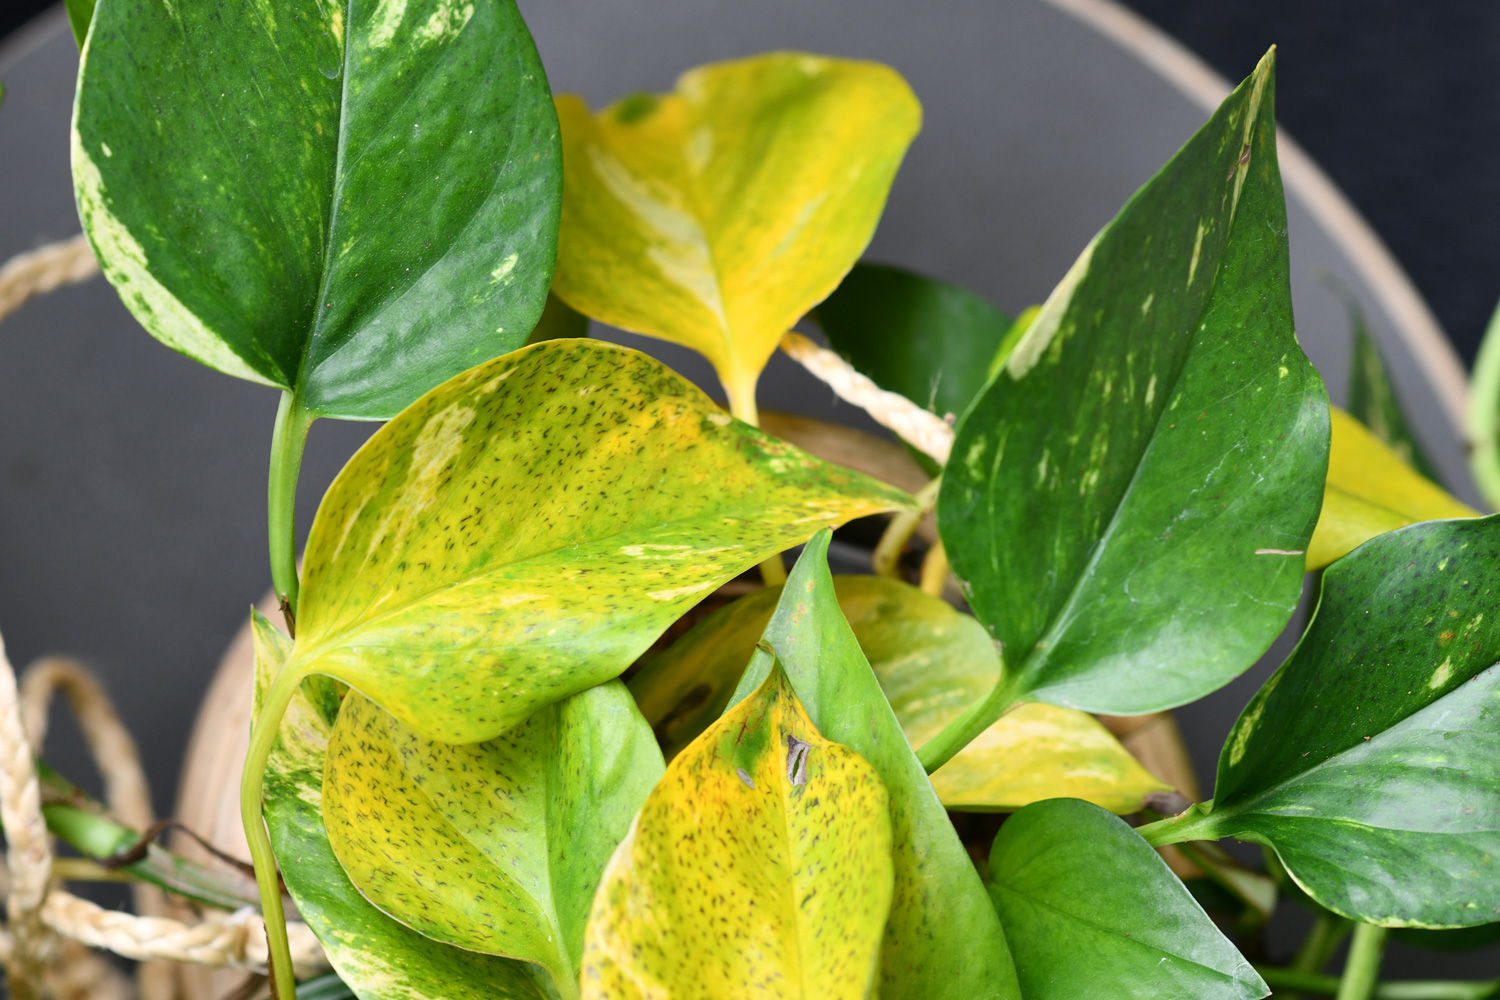 Golden Pothos houseplant with unknown leaf spot disease in shape of small black stripes caused by fungus or bacterial infection